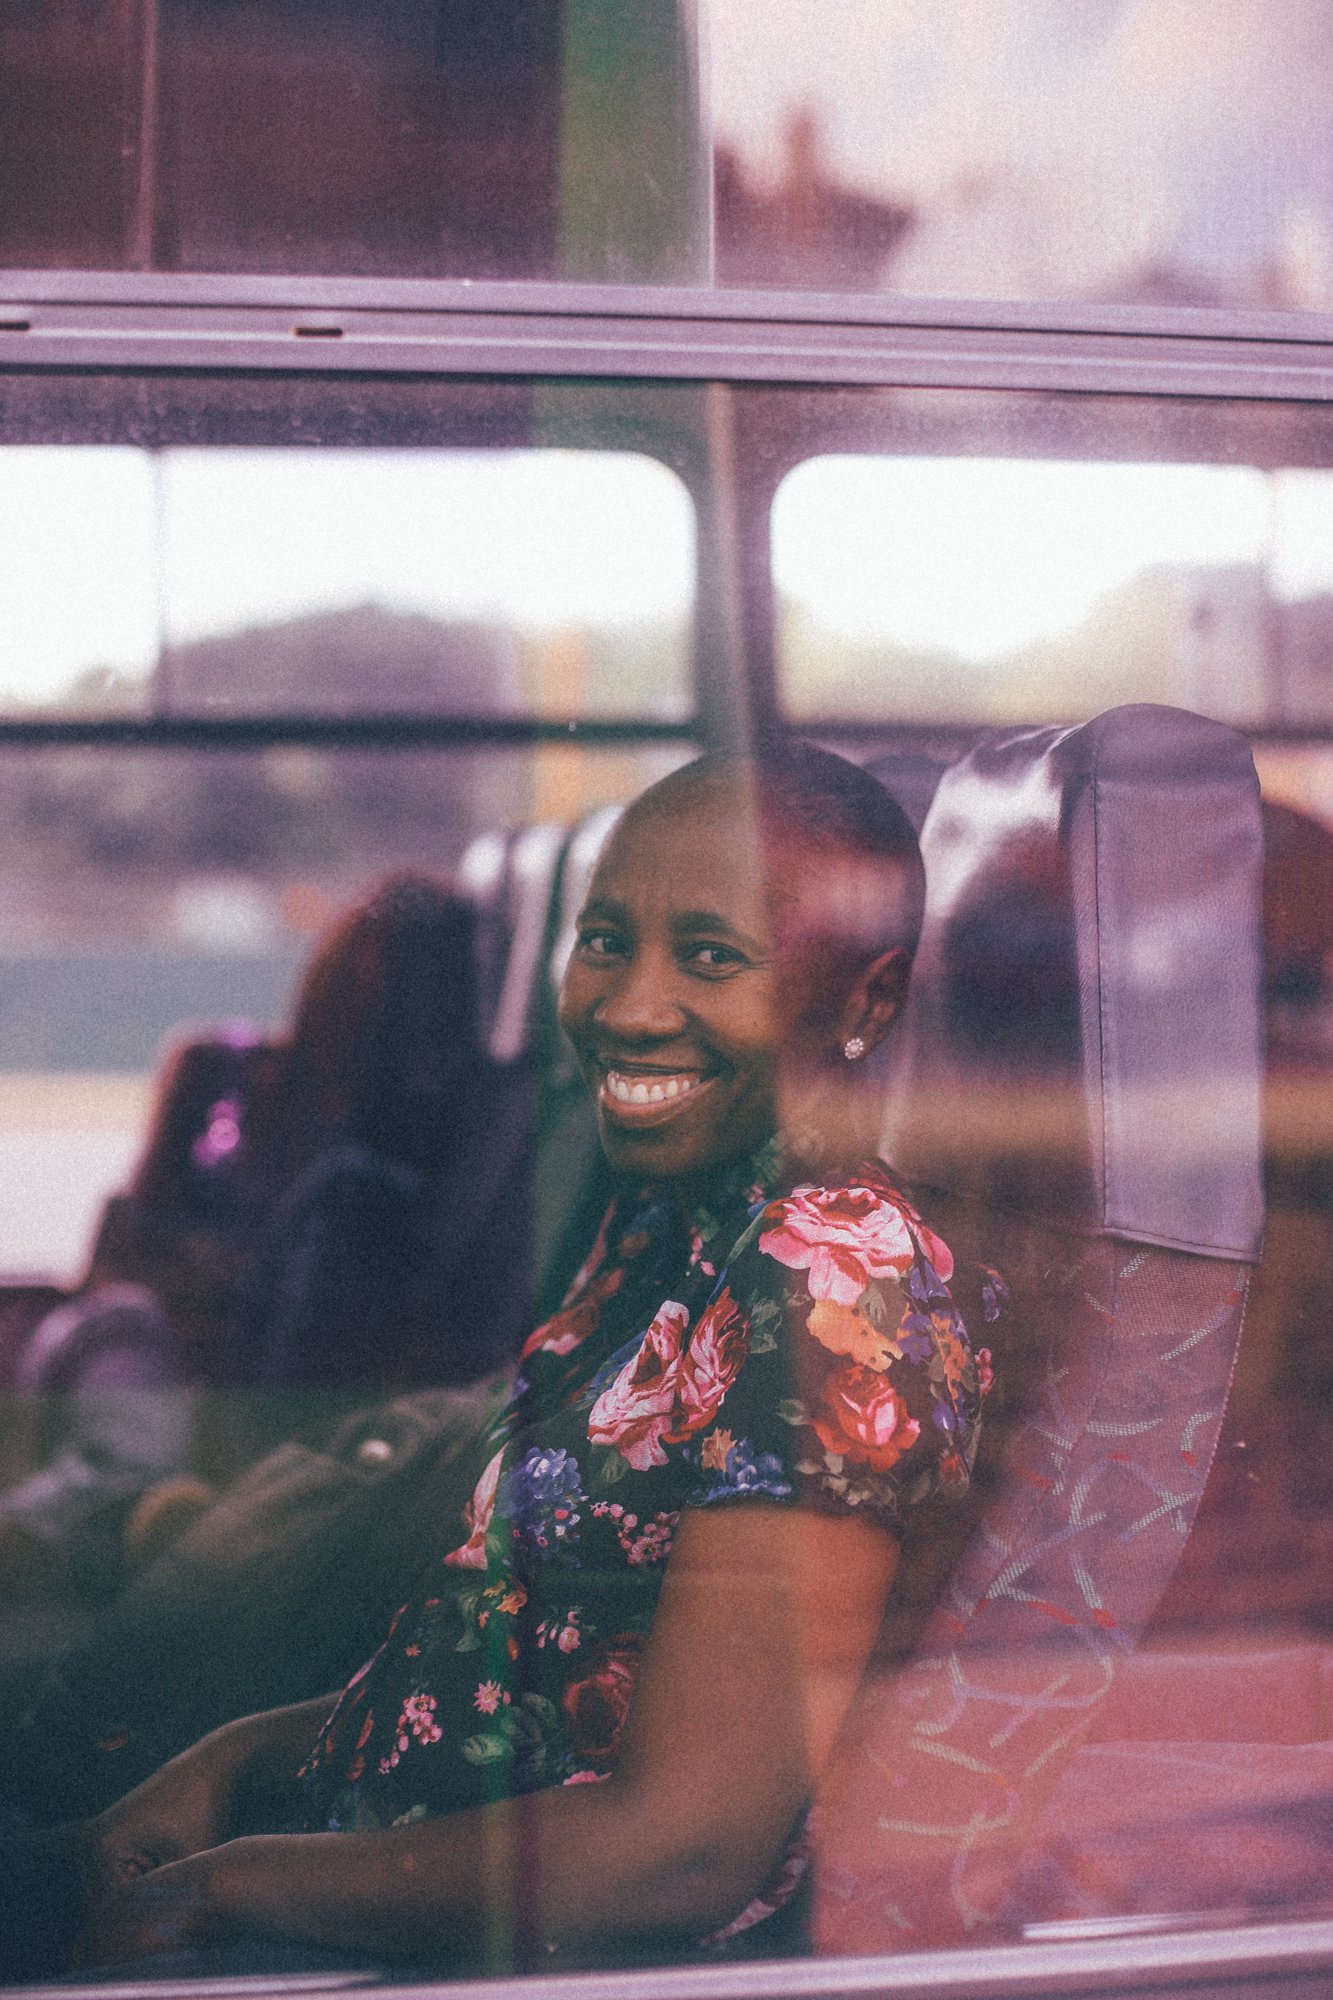 A candid moment whilst a women rides the bus on the way home. Photograph by Nicholas Rawhani.